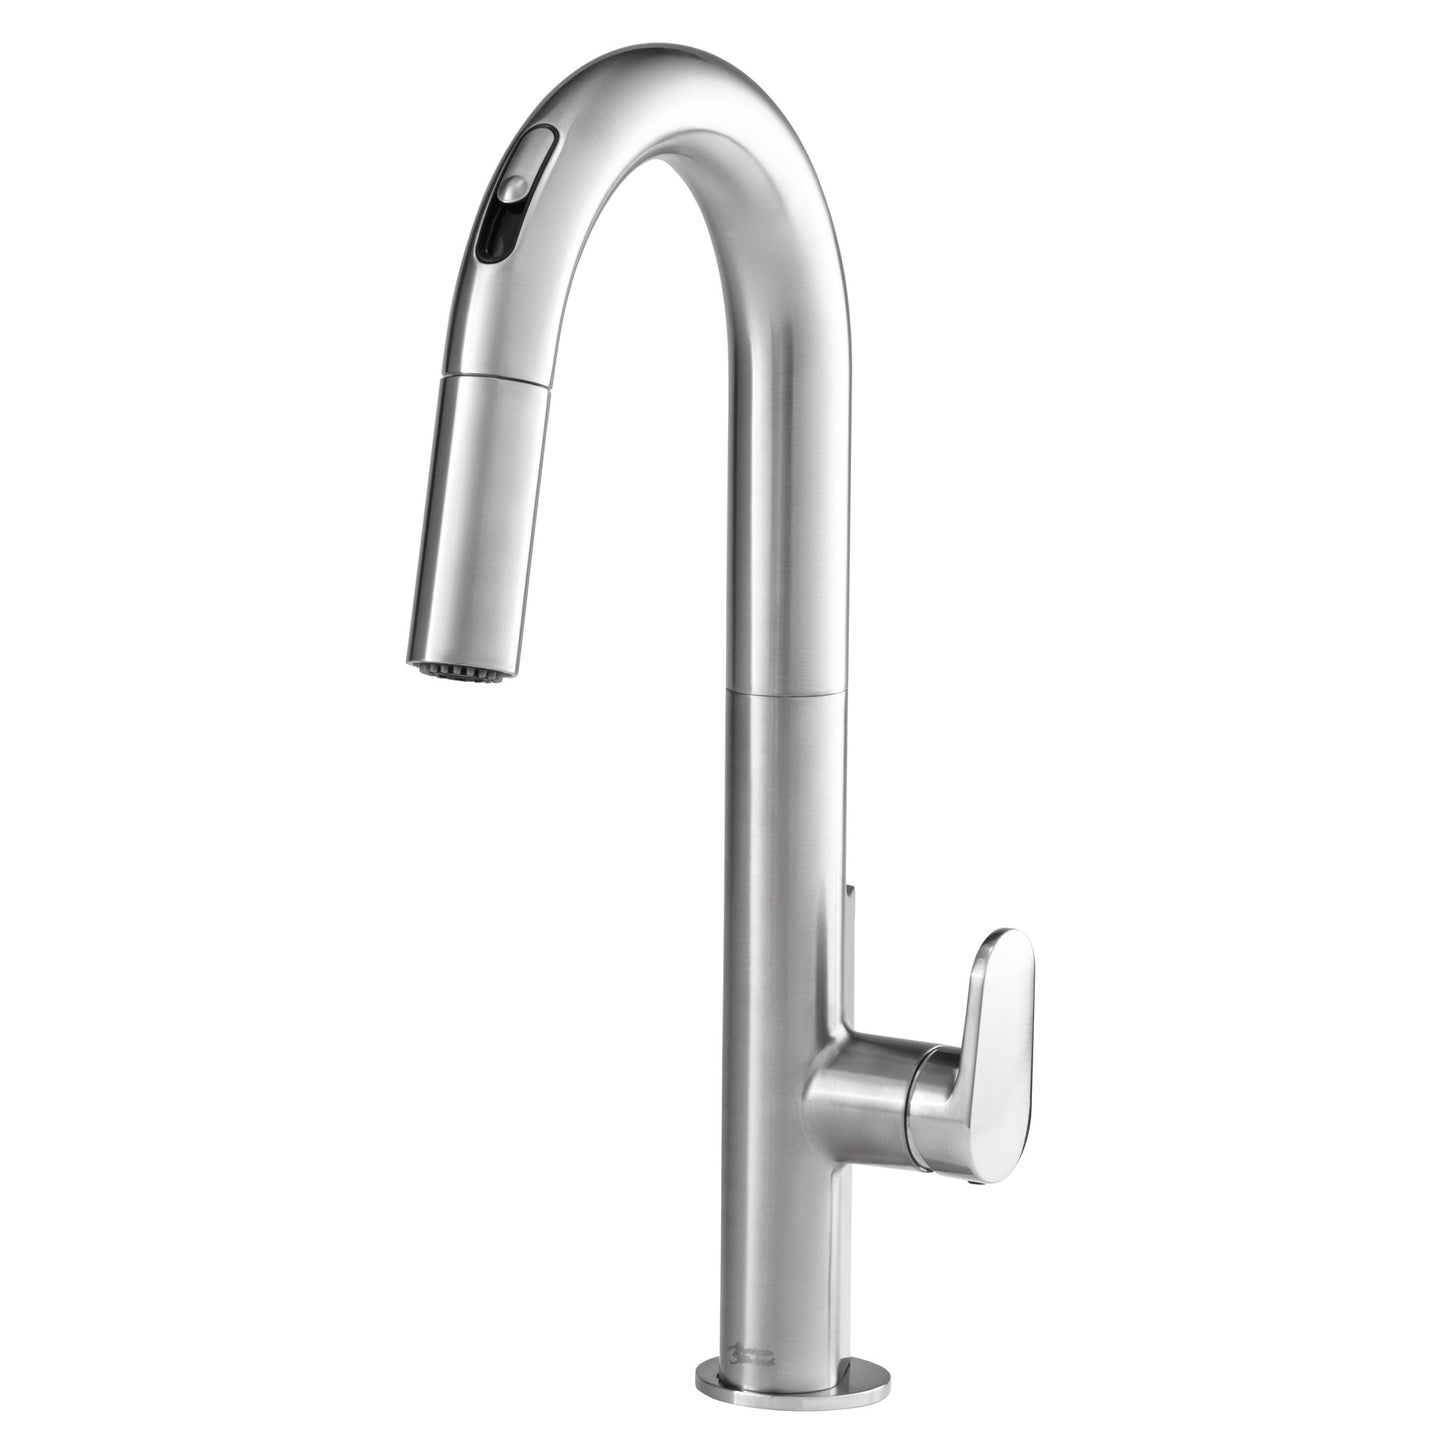 AMERICAN-STANDARD 4931380.075, Beale Touchless Single-Handle Pull-Down Dual Spray Kitchen Faucet 1.5 gpm/5.7 L/min in Stainless Stl